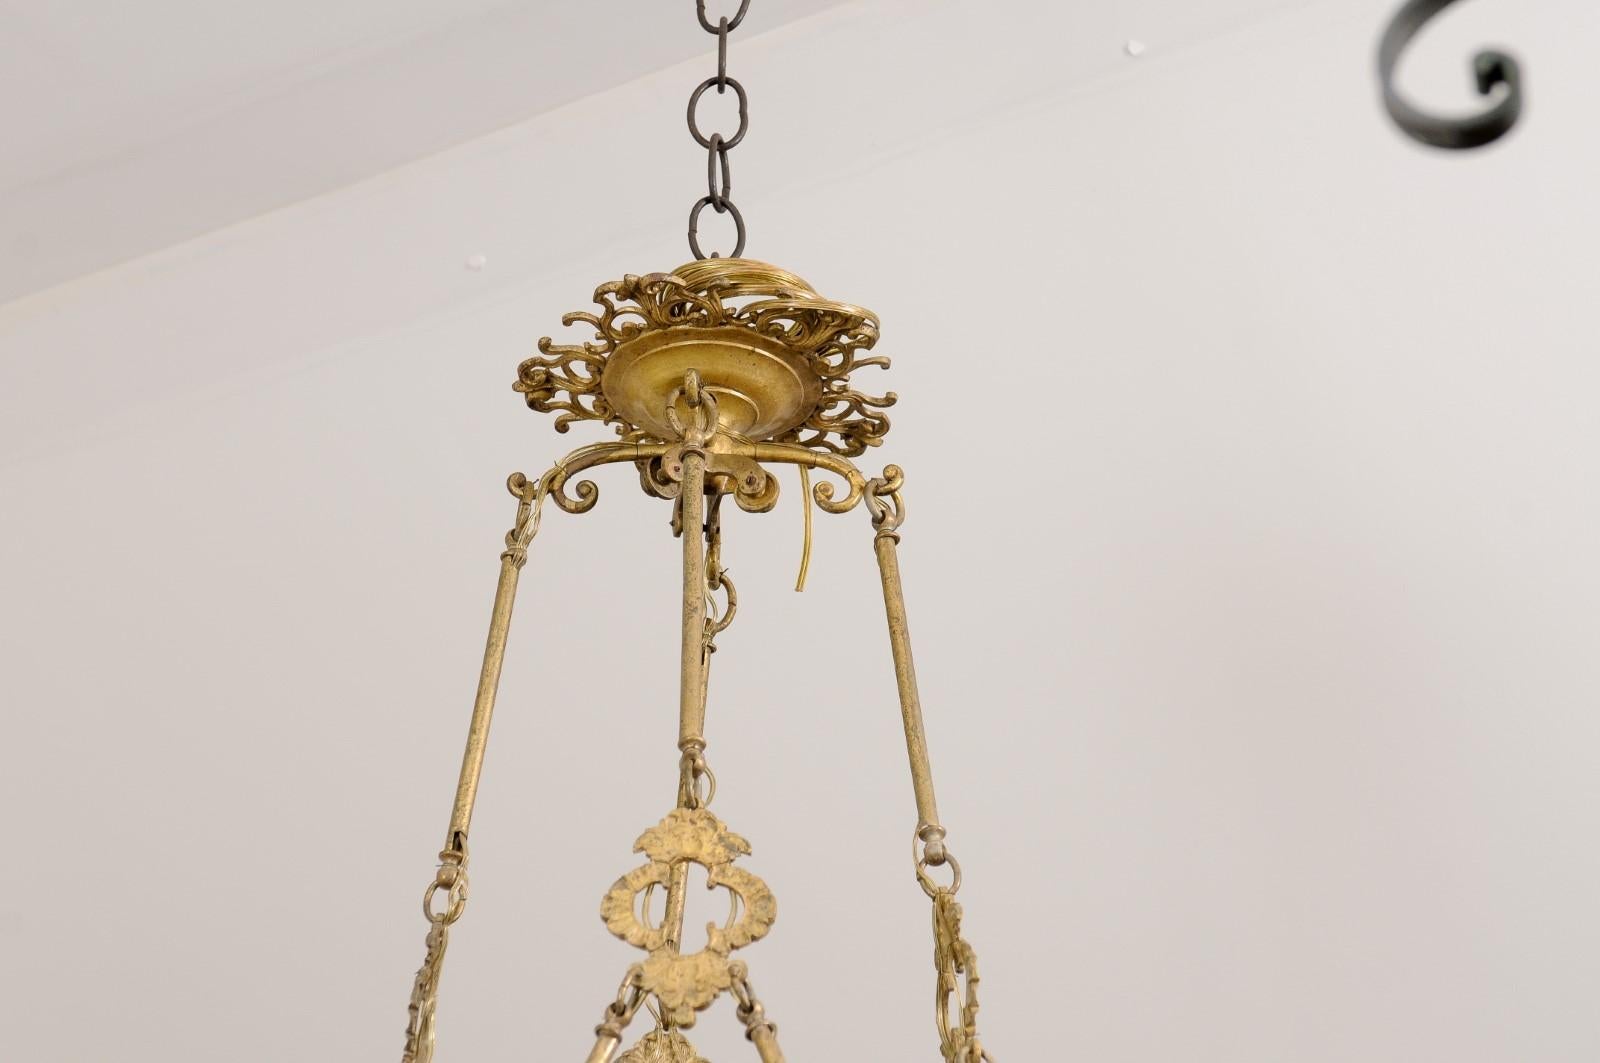 French 19th Century Bronze Twelve Light Ring Chandelier with Scrolling Arms For Sale 10